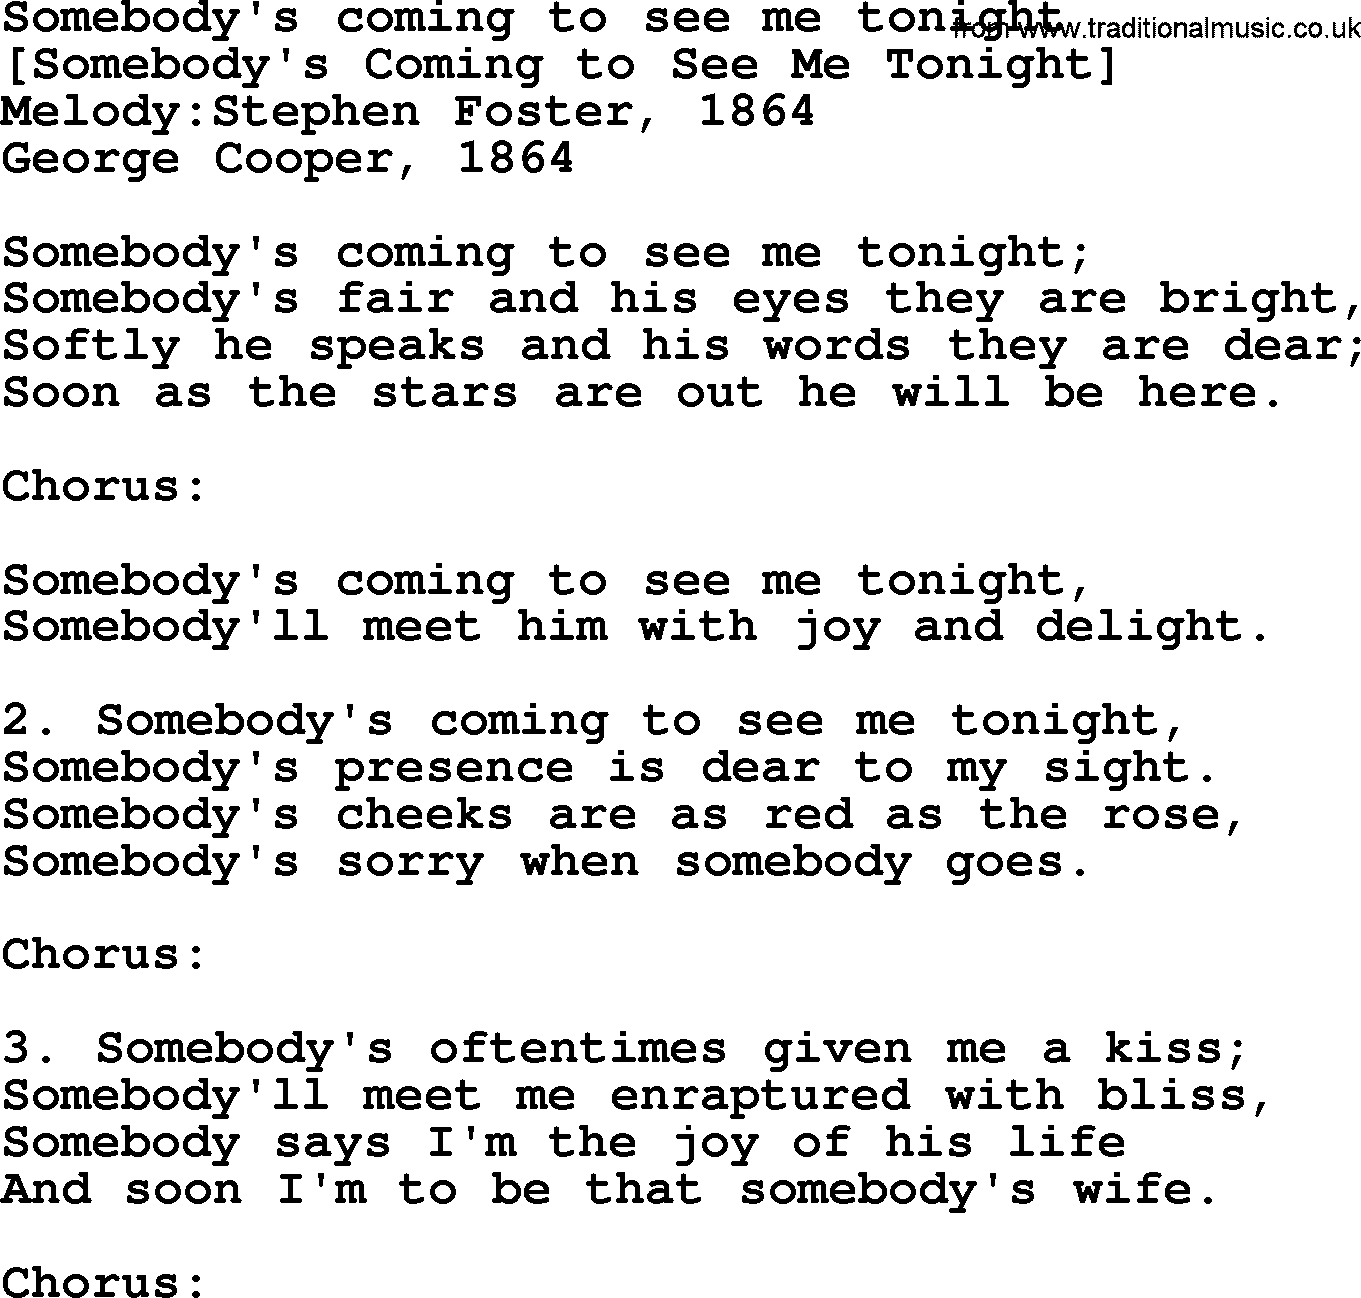 Old American Song: Somebody's Coming To See Me Tonight, lyrics